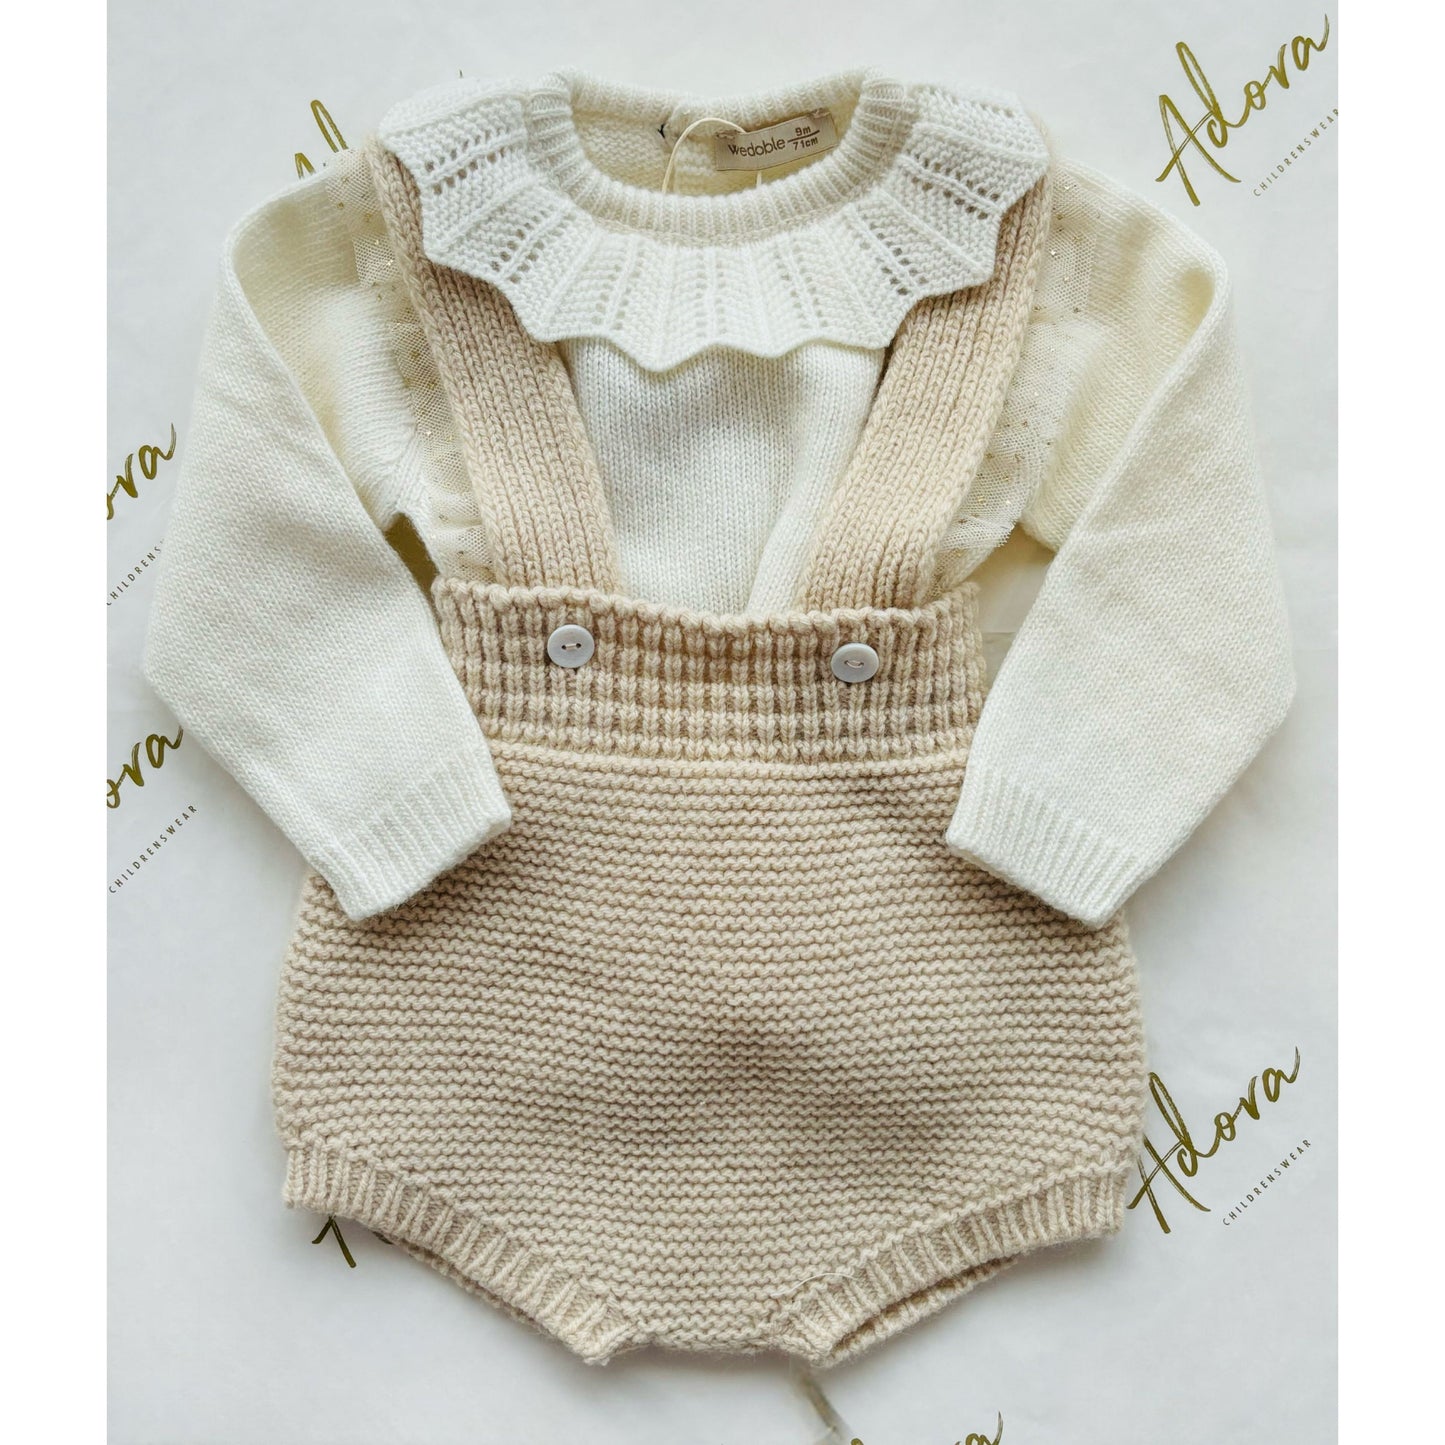 Beige and cream knitted set for baby girls - Wedoble